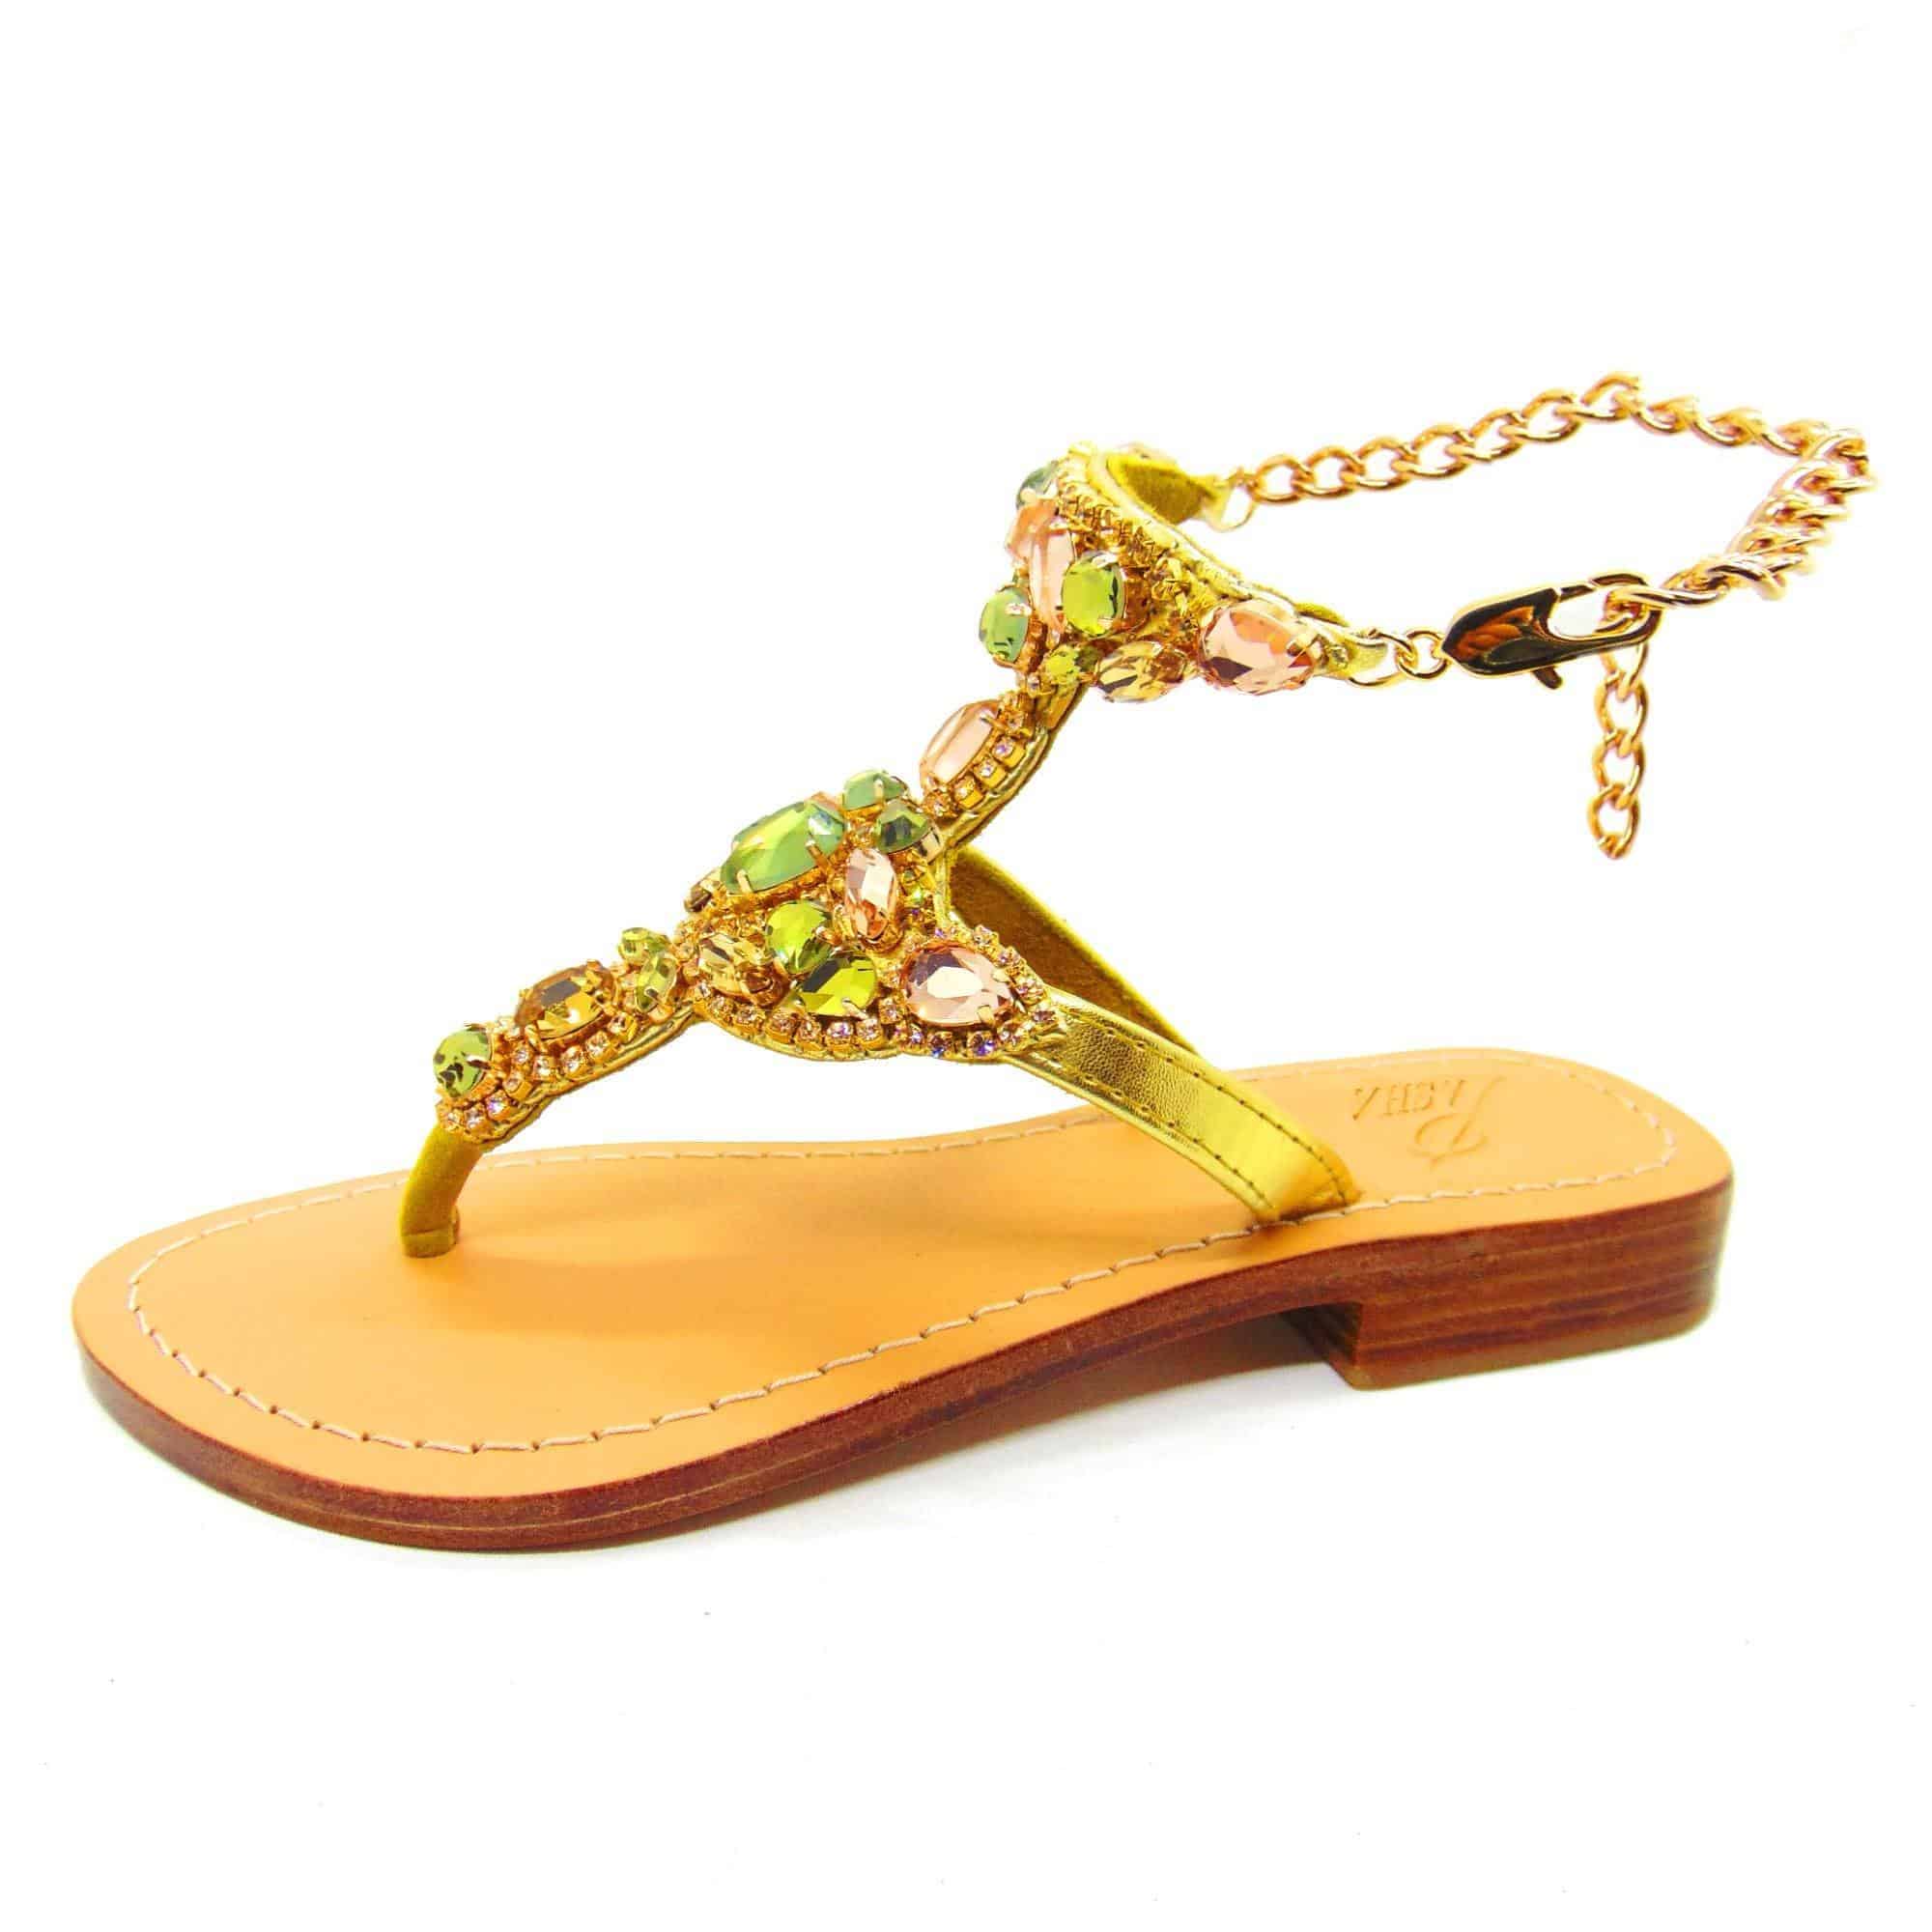 HARMIL - Pasha Sandals - Jewelry for your feet - 